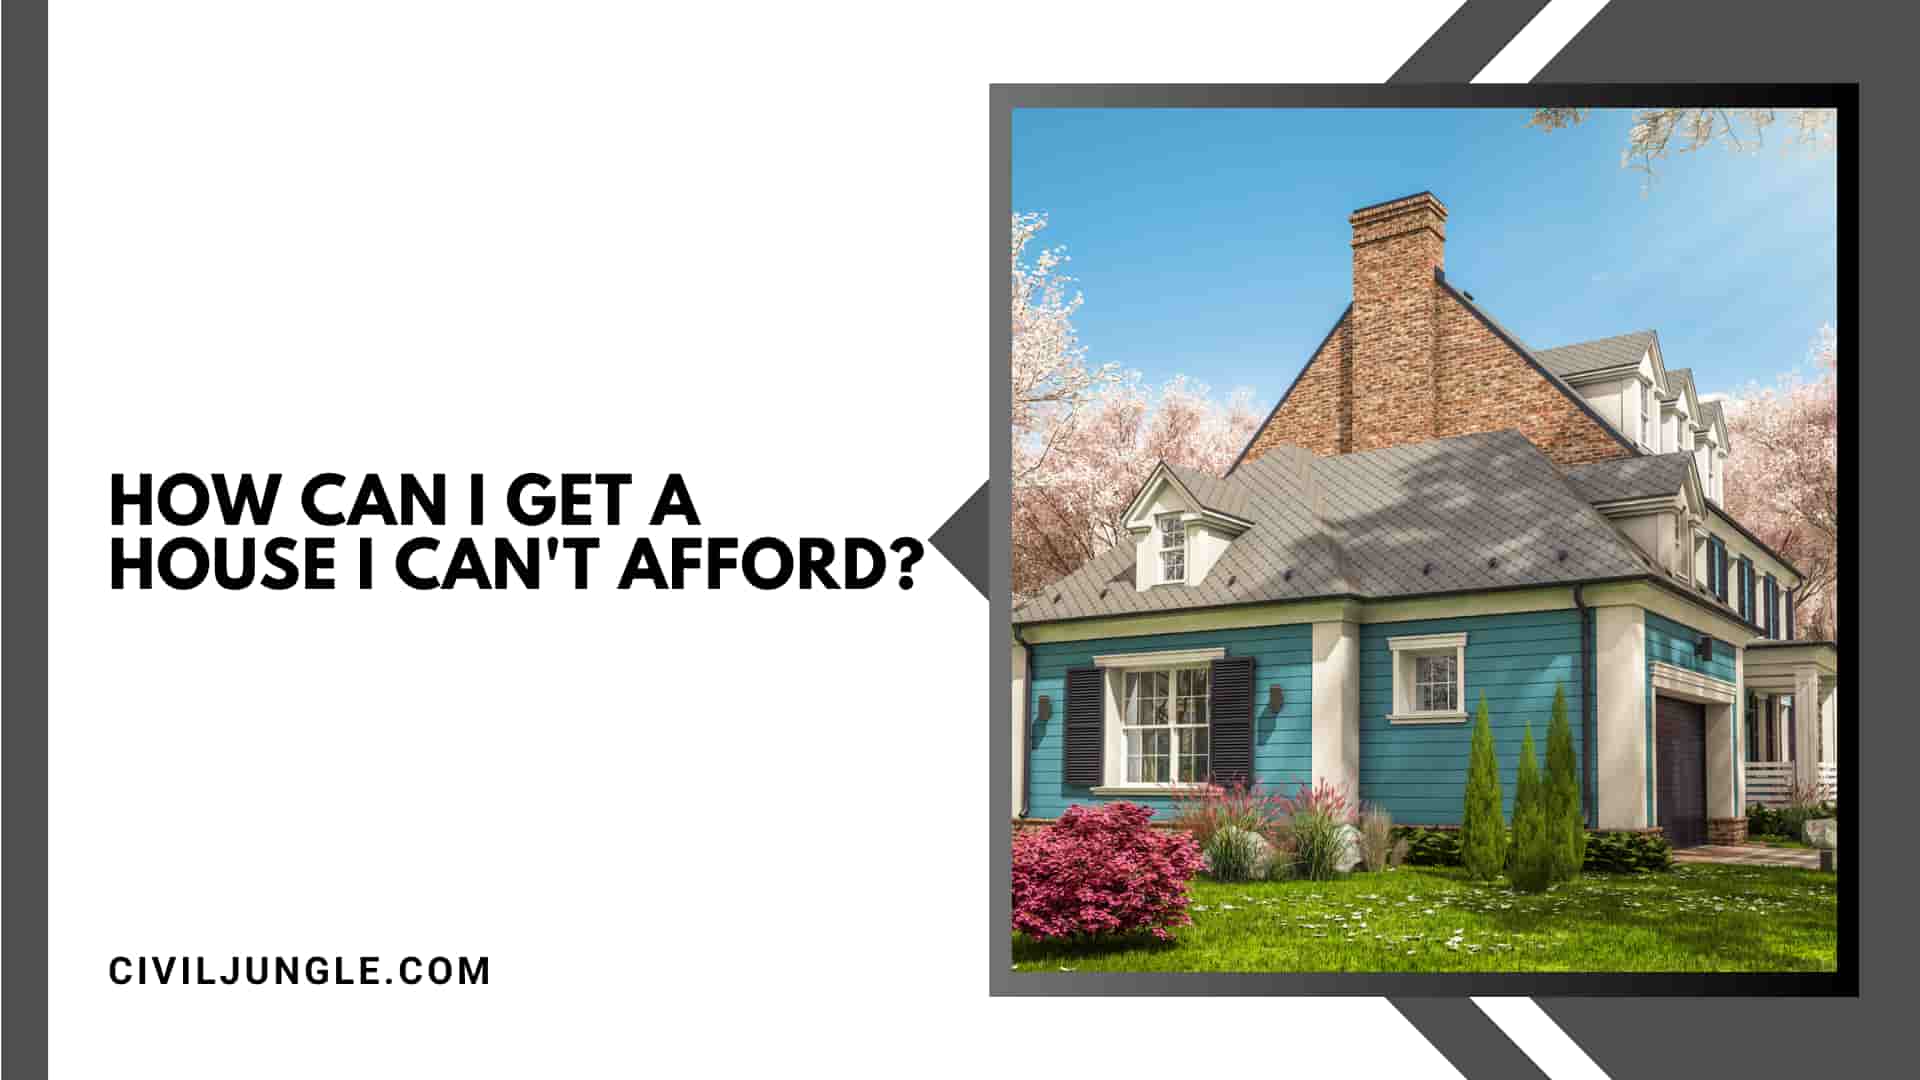 How Can I Get a House I Can't Afford?